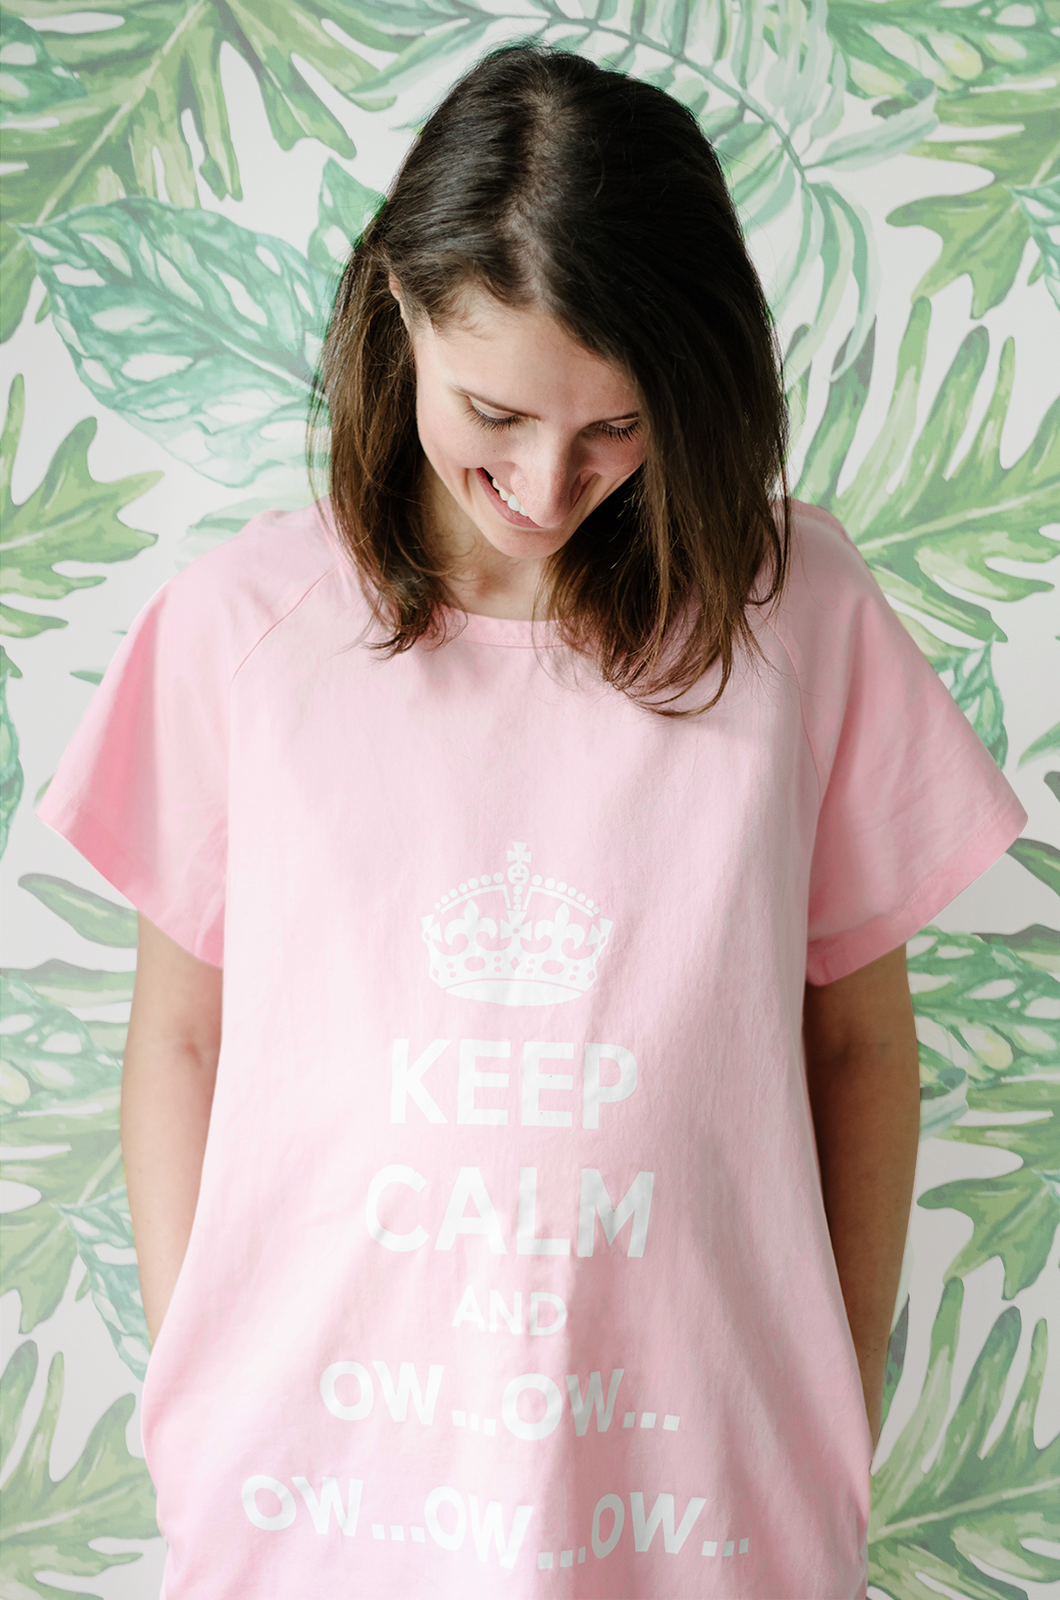 Keep Calm Ow (Pink) Maternity